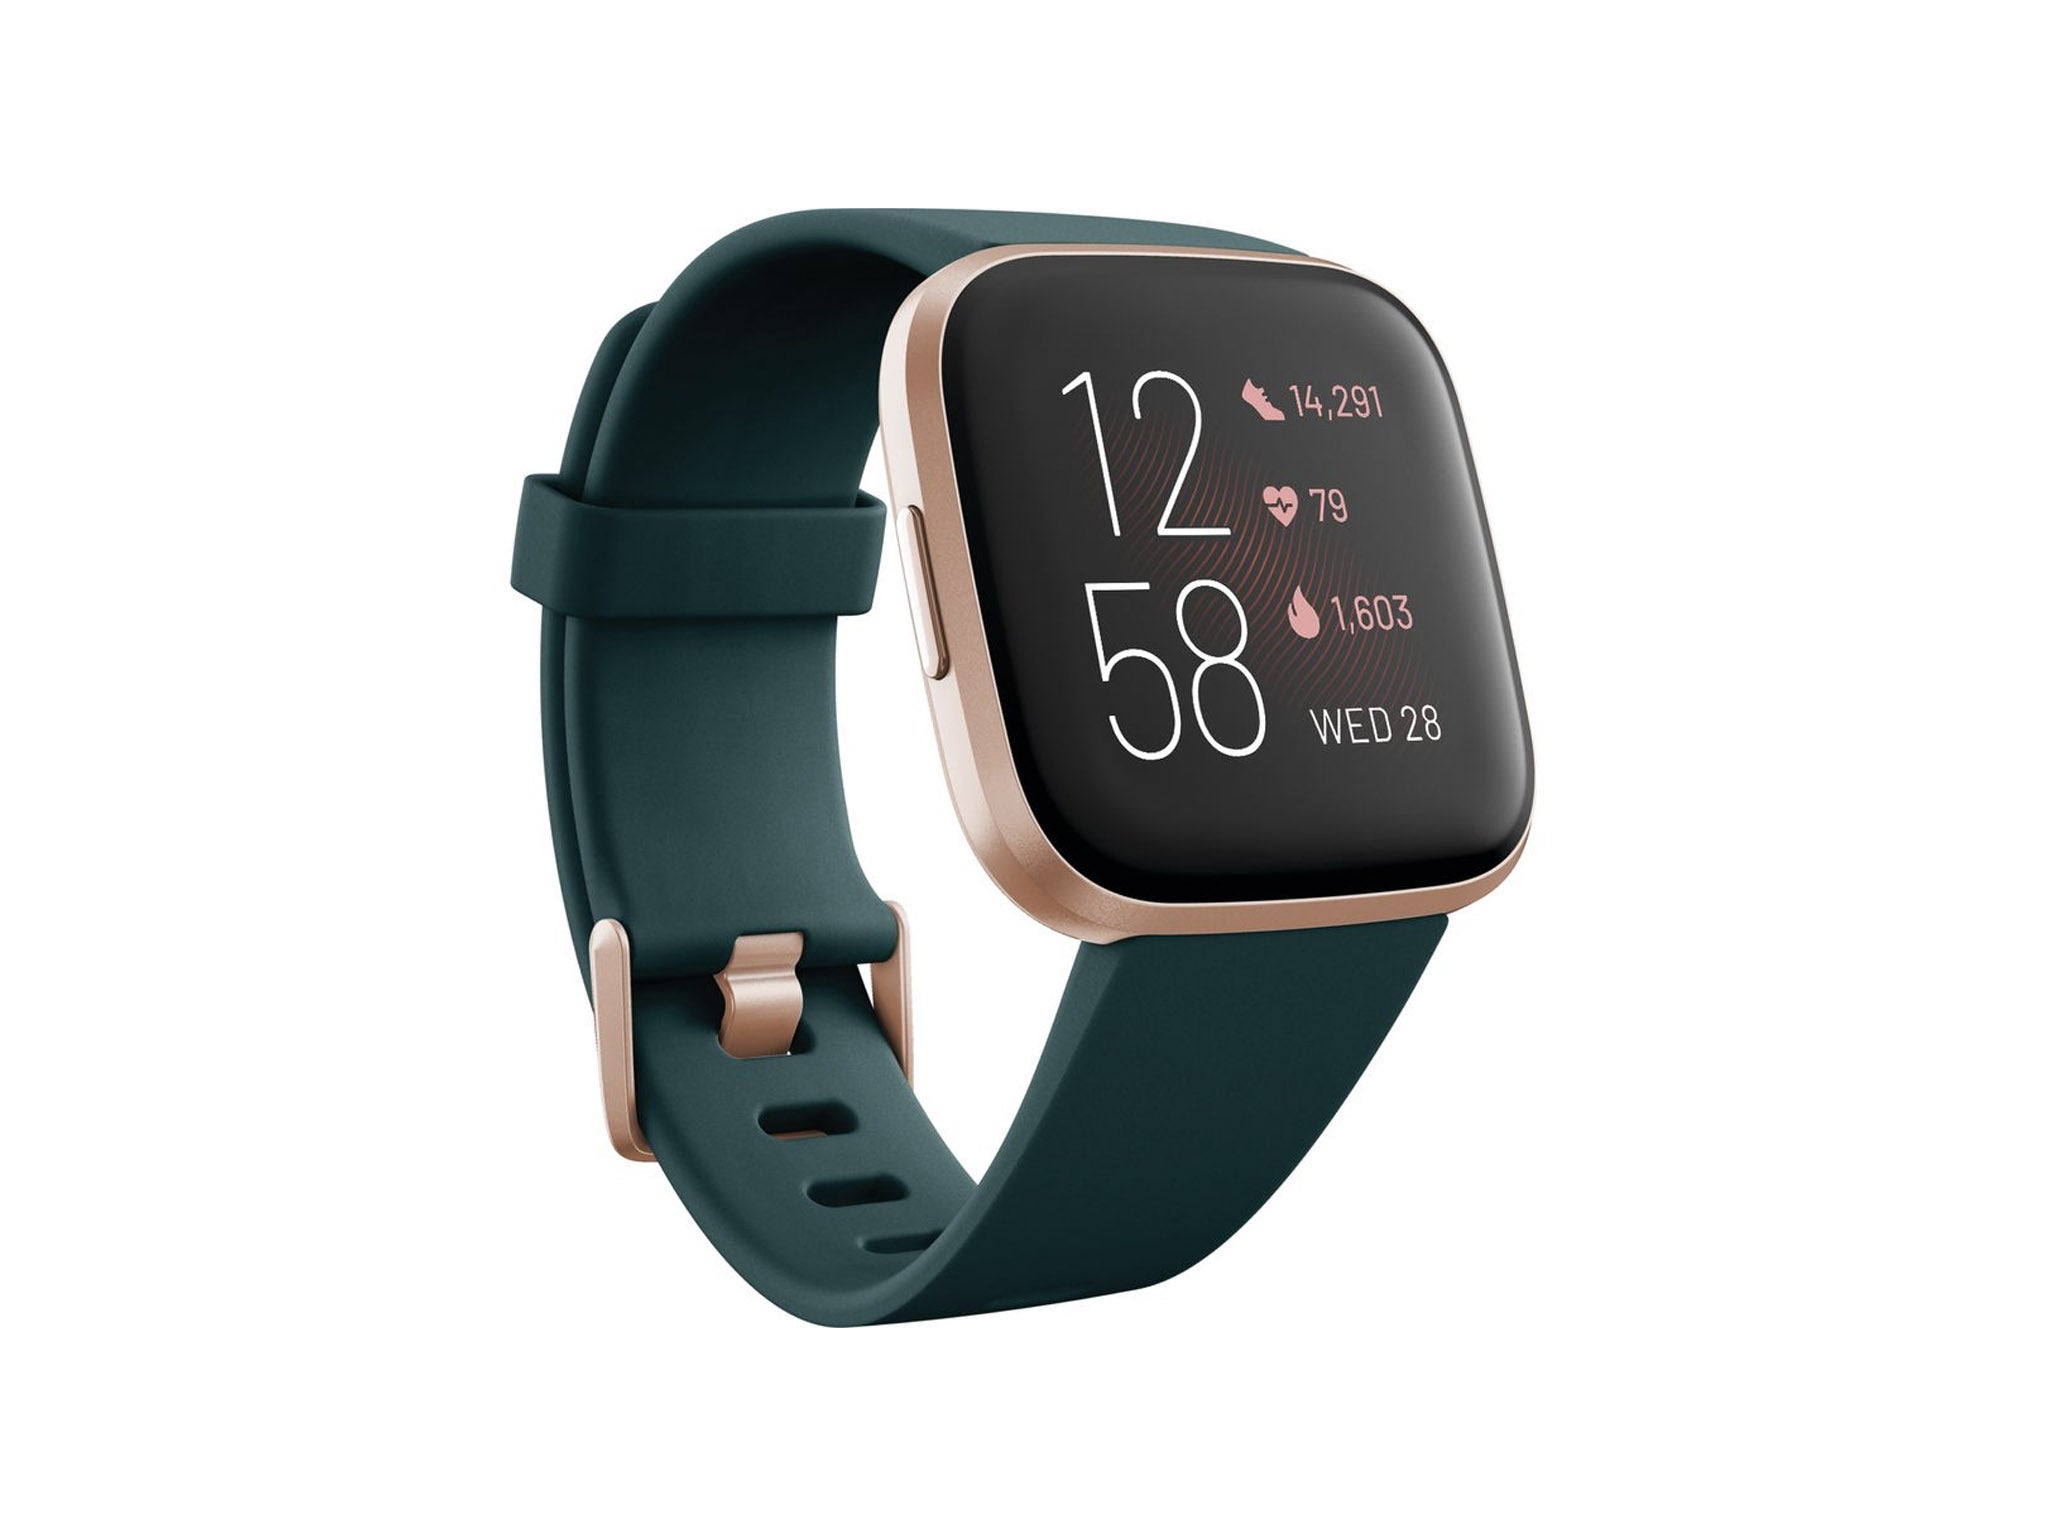 Fitbit Black Friday deals 2021: Save 40% on the versa 2 fitness tracker in the Currys sale